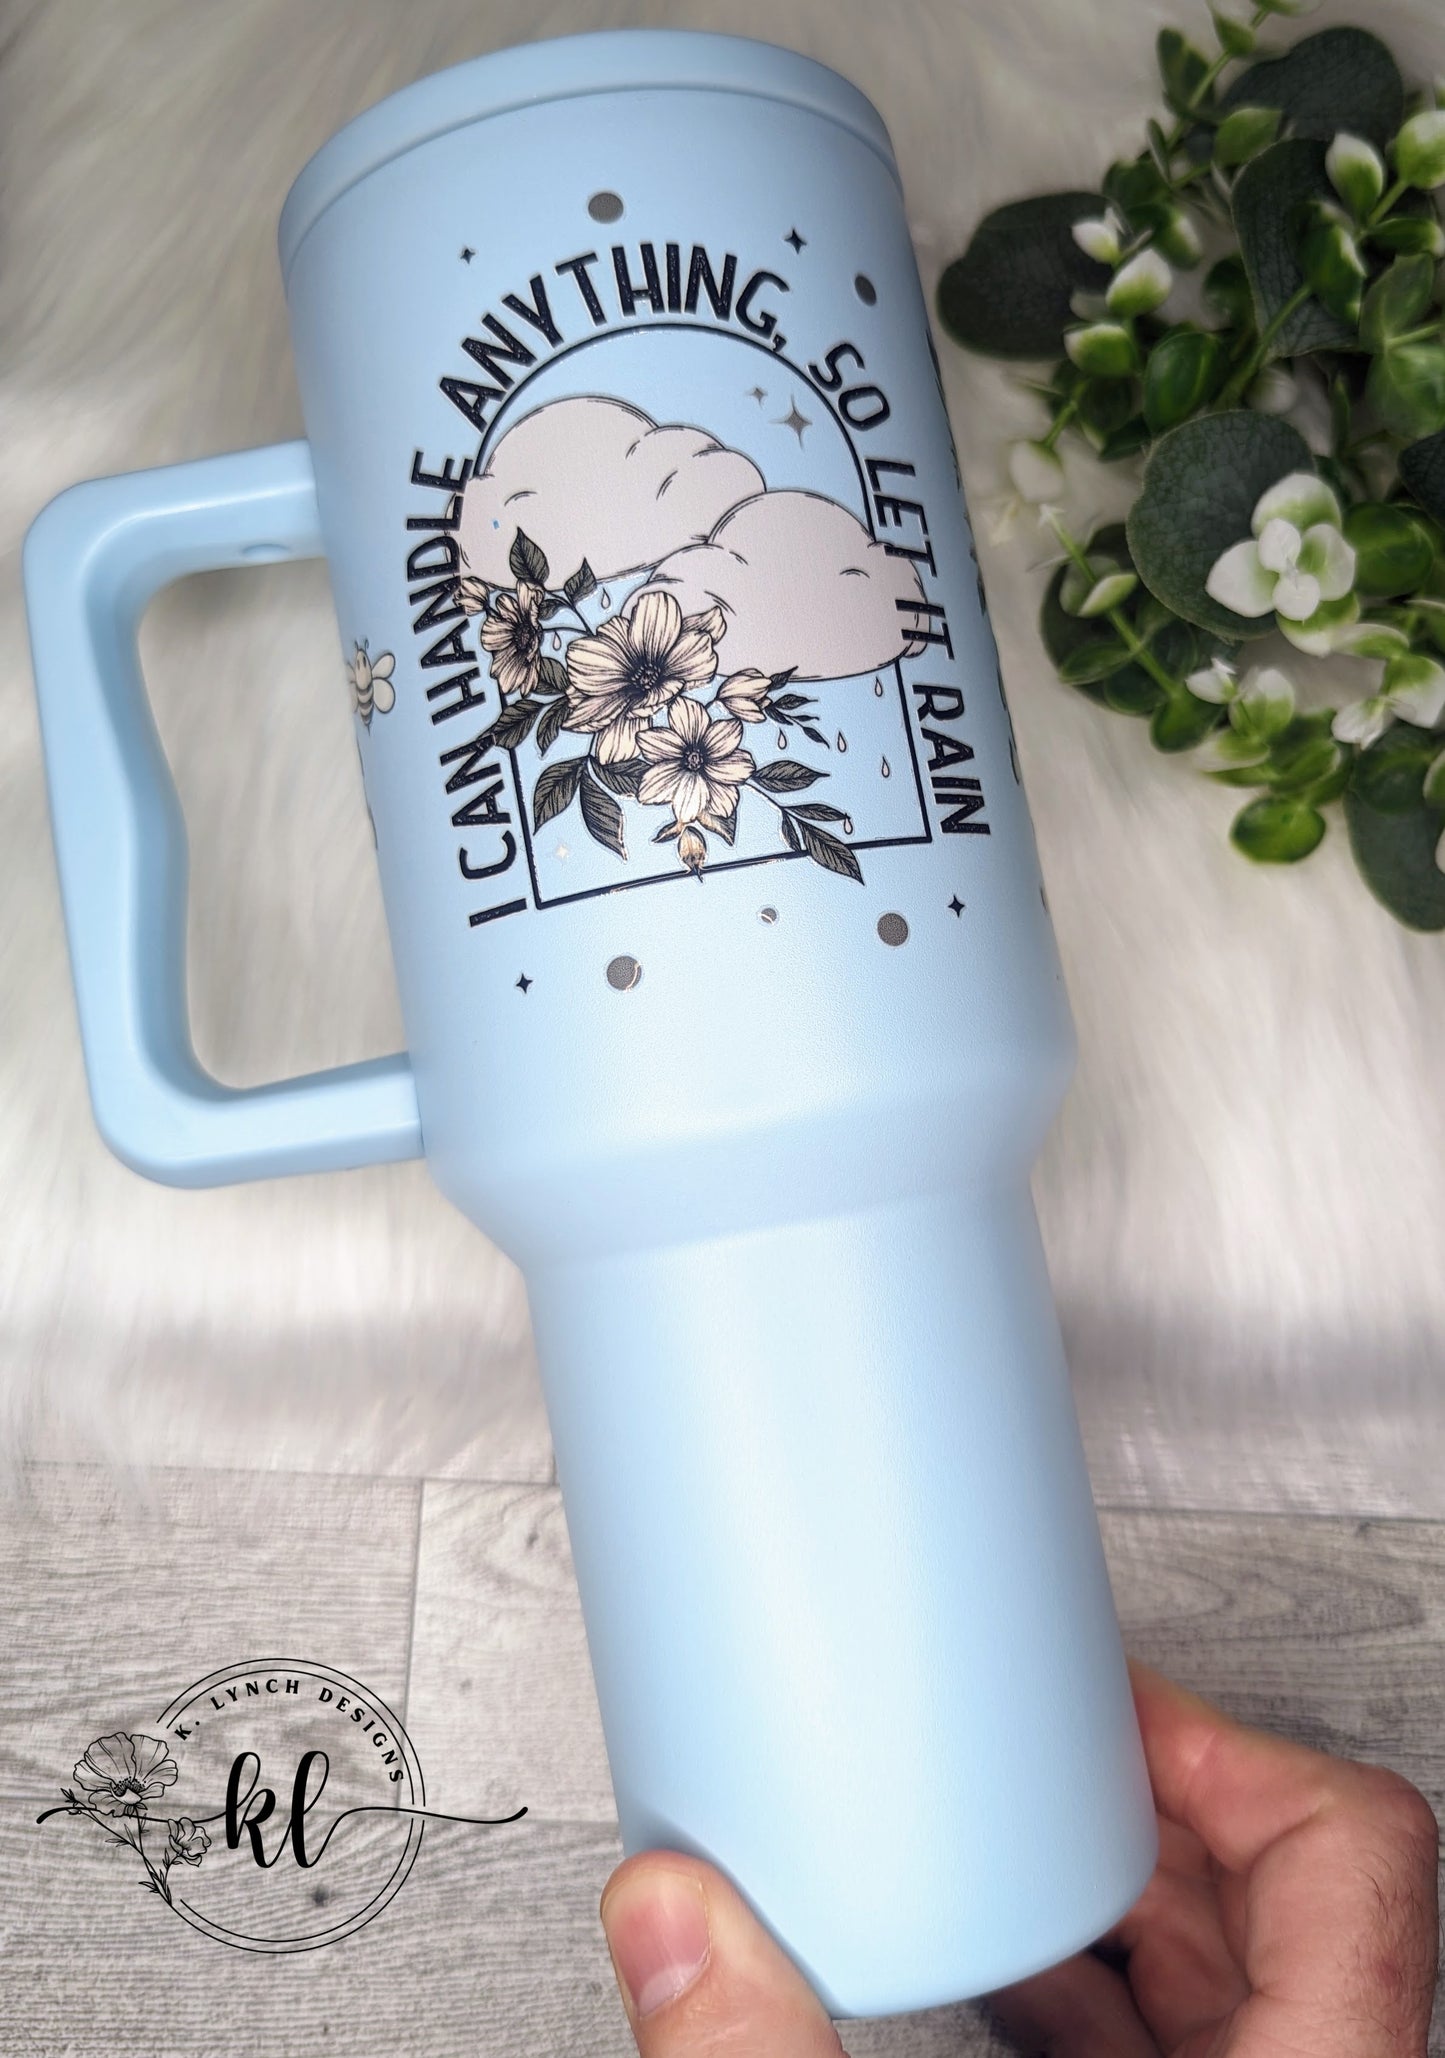 40 oz. Handle Tumbler "I Can Handle Anything So Let It Rain"